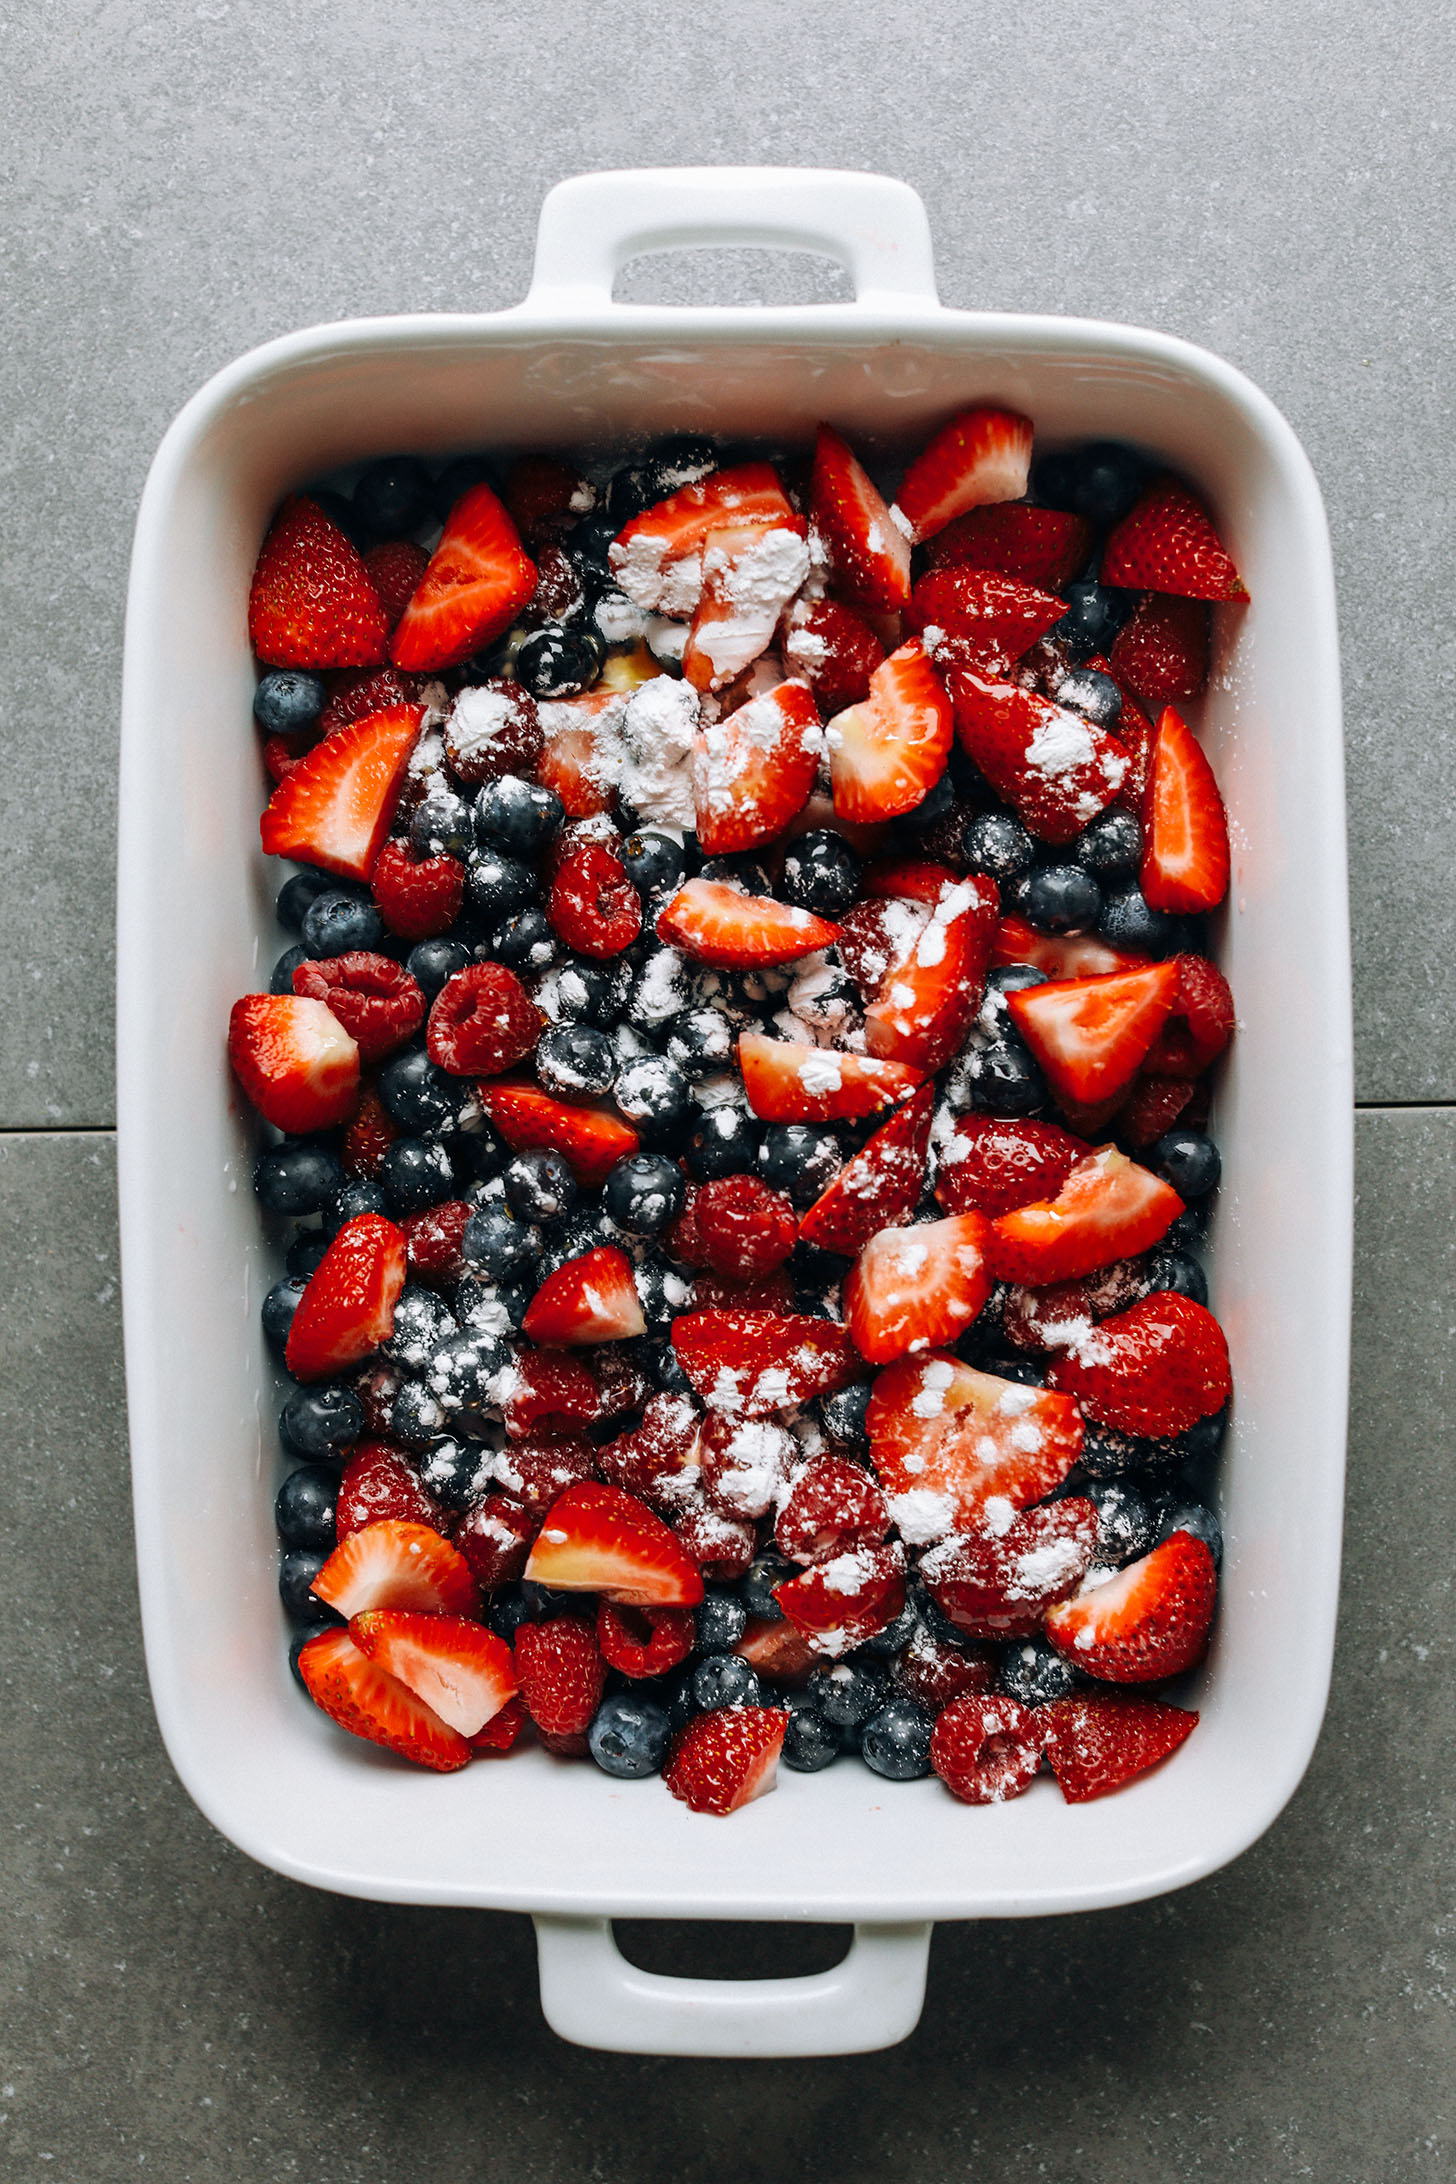 Fresh berries in a ceramic baking dish with arrowroot, lemon juice, and maple syrup